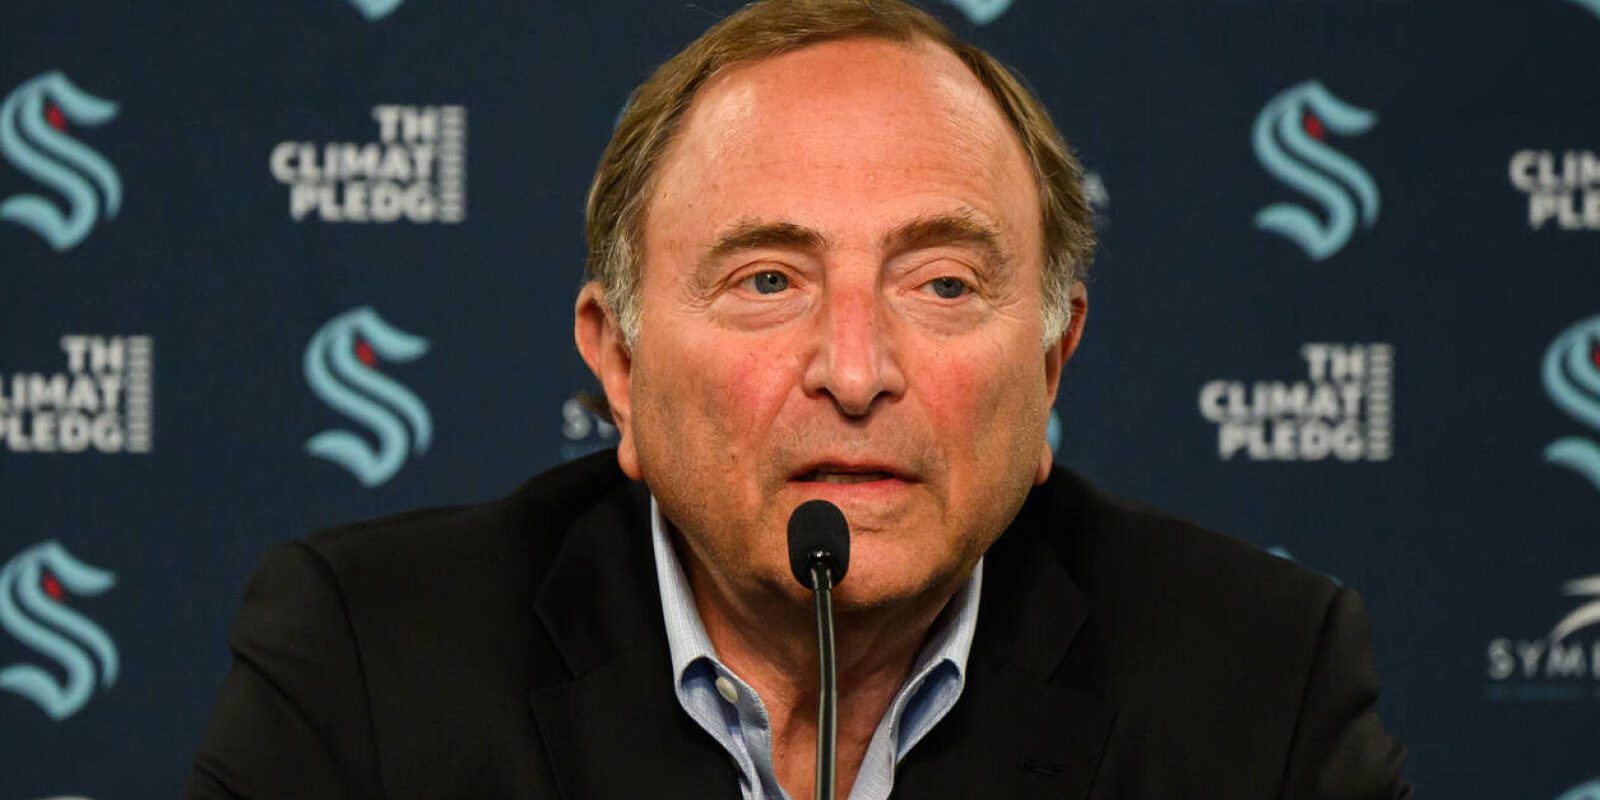 Mar 30, 2023; Seattle, Washington, USA; NHL commissioner Gary Bettman addresses the media prior to the game between the Seattle Kraken and the Anaheim Ducks at Climate Pledge Arena. Mandatory Credit: Steven Bisig-USA TODAY Sports